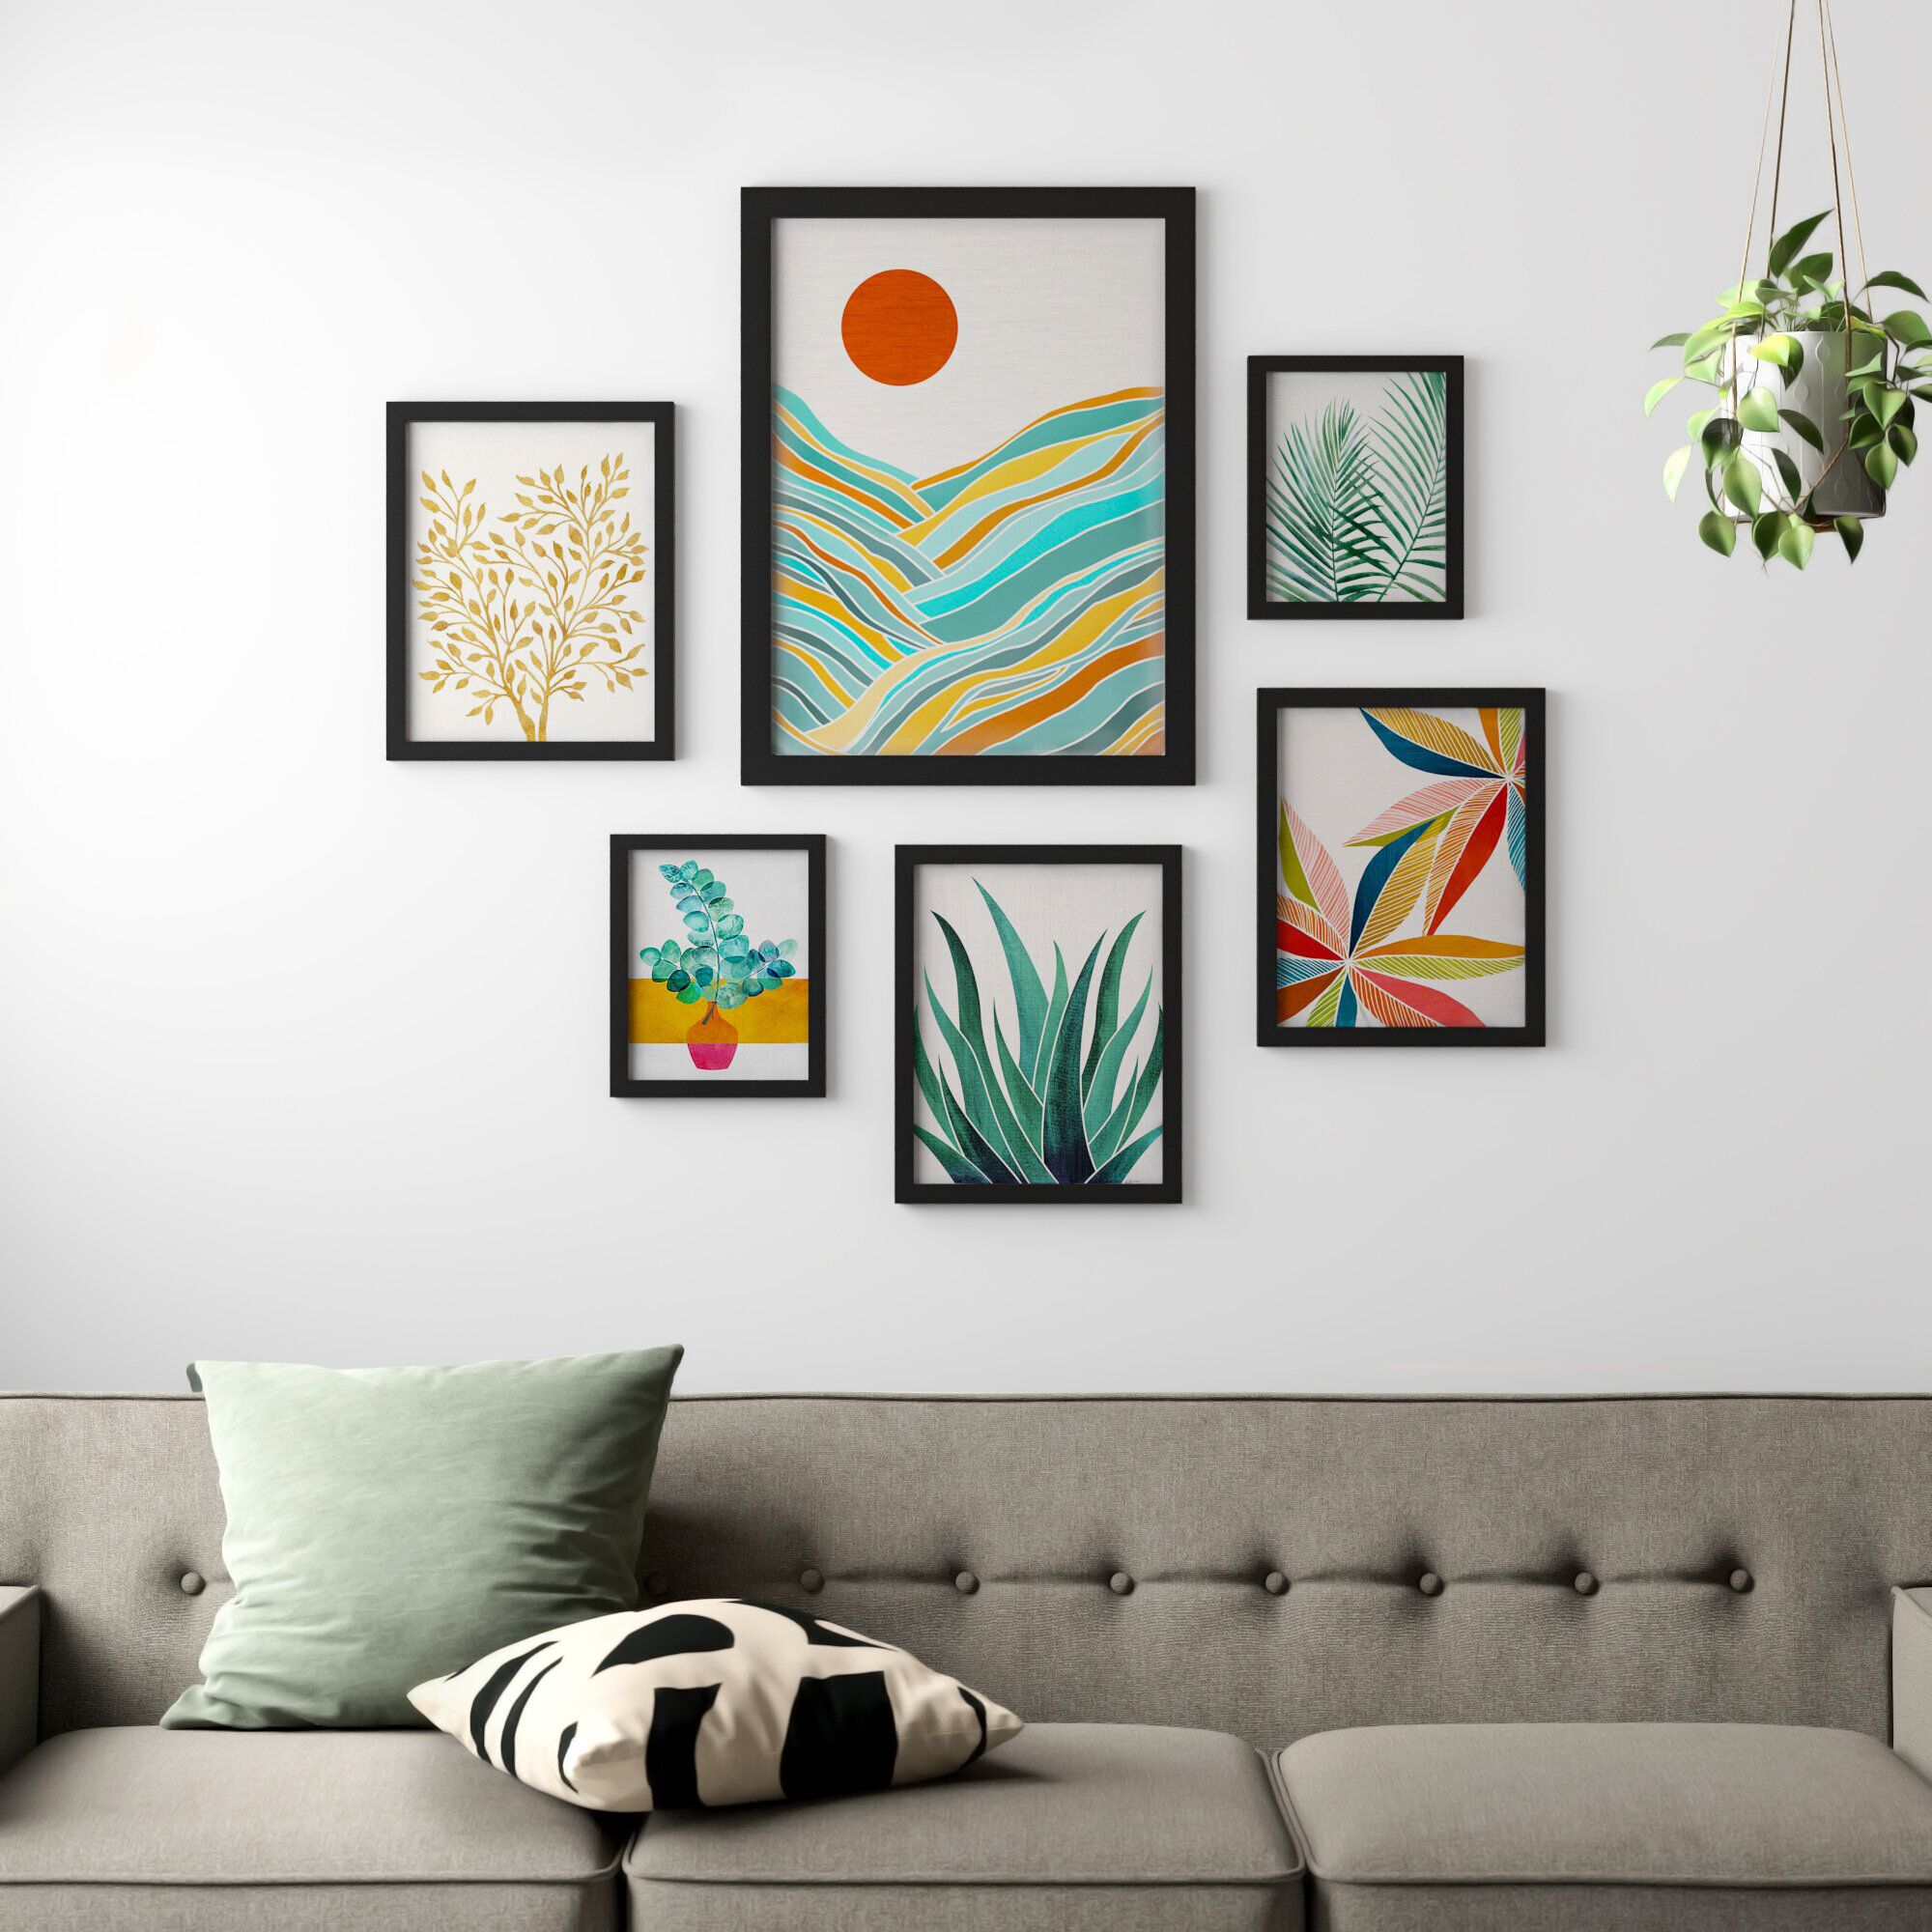 Wayfair | Tropical Wall Art You'll Love In 2022 For Tropical Evening Wall Art (View 14 of 15)